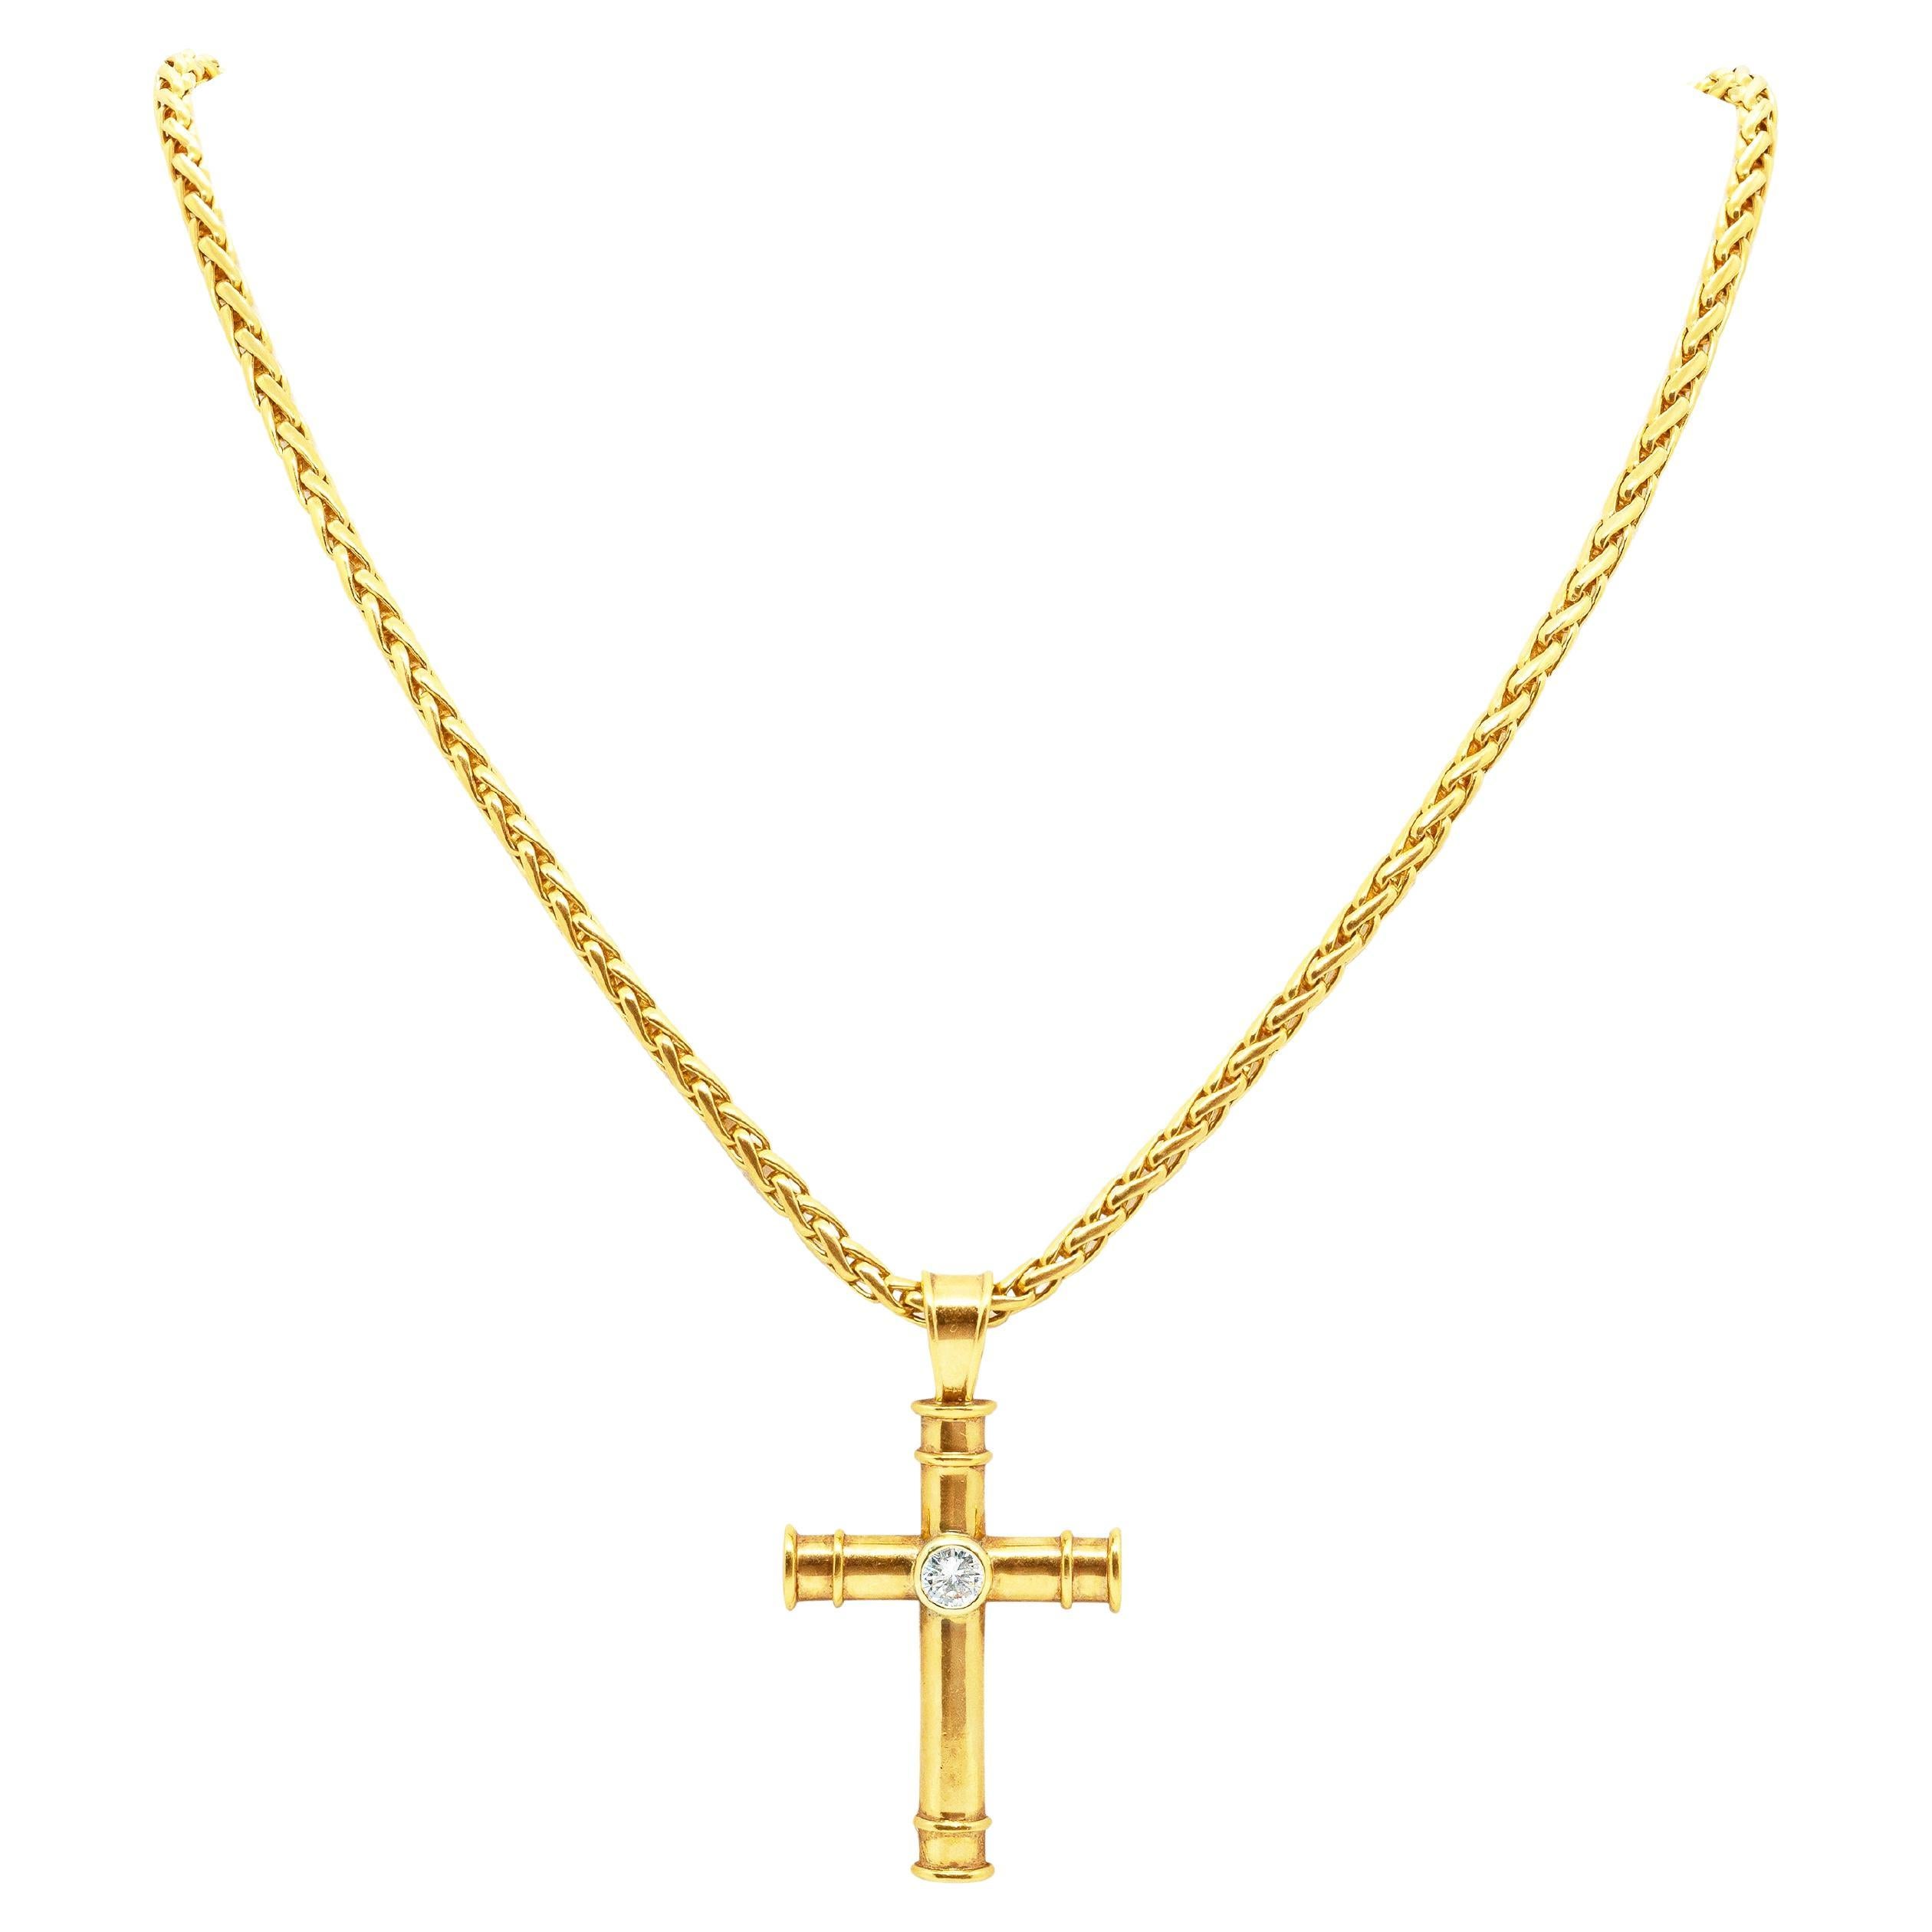 Theo Fennell Diamond Cross 18 Carat Gold Pendant and Chain For Sale